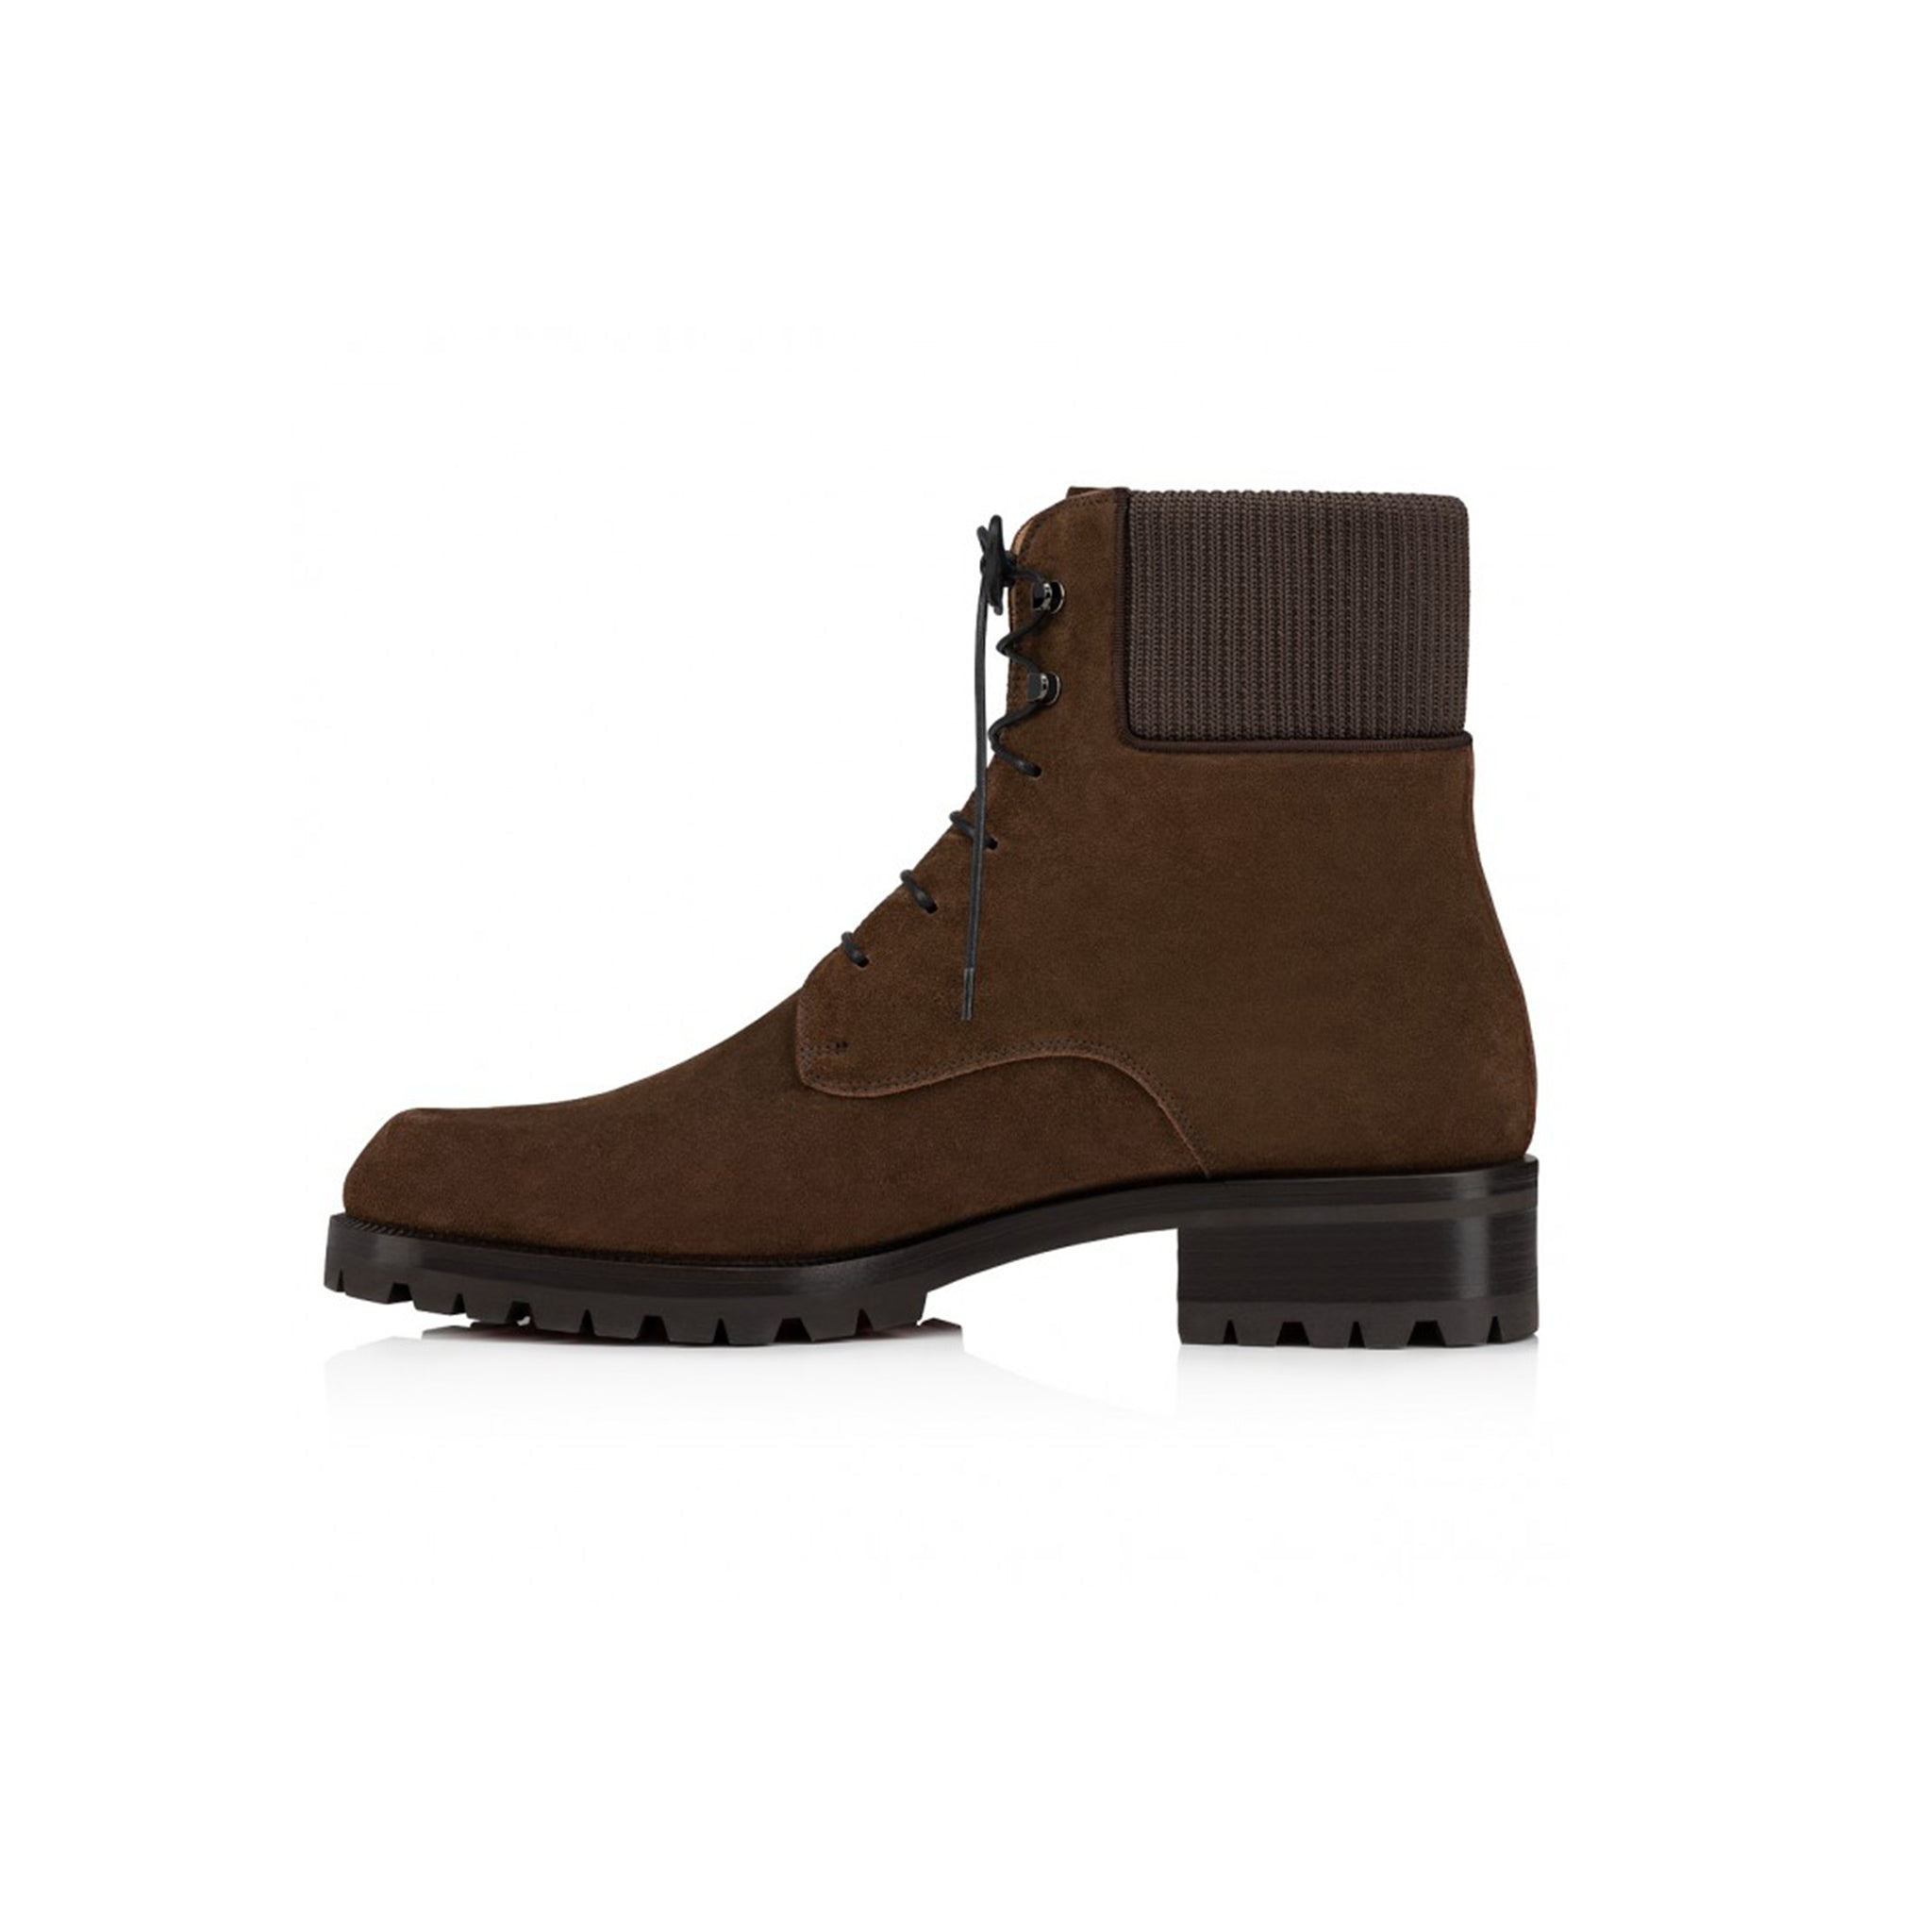 Cocoa Suede Men's Boots